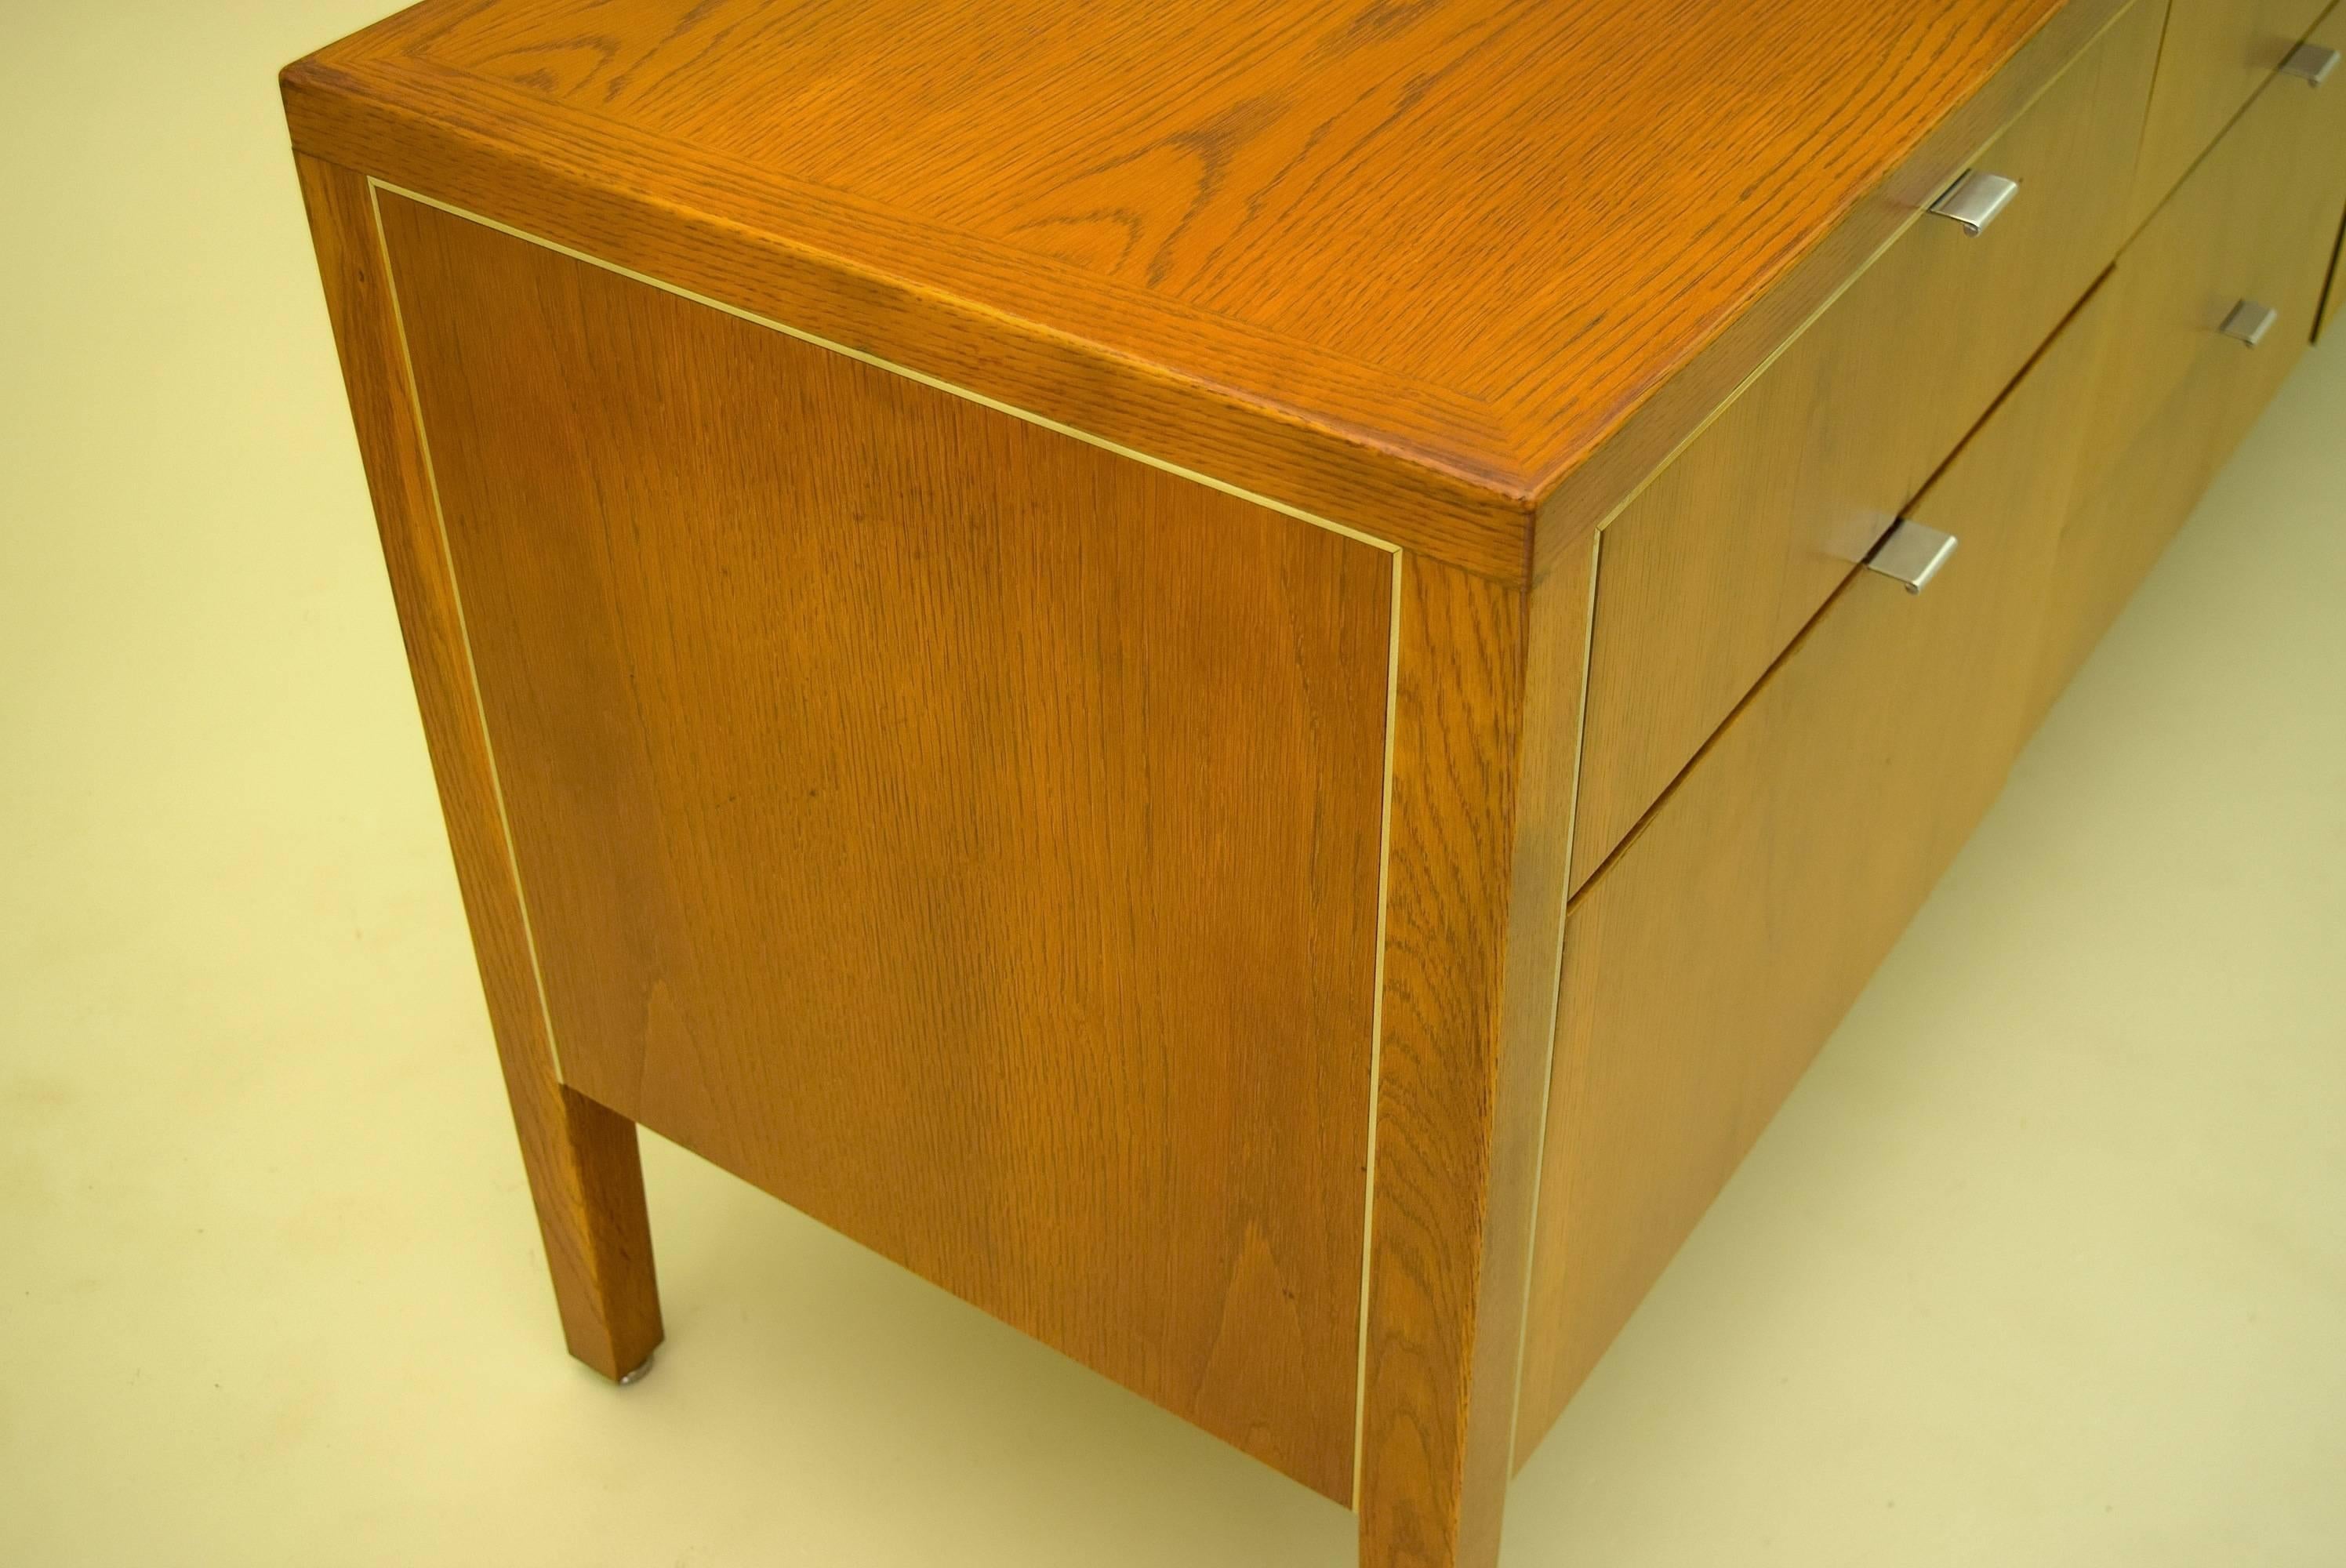 Mid-Century Modern Oak Credenza by Domore Stow Davis for Ashland Oil